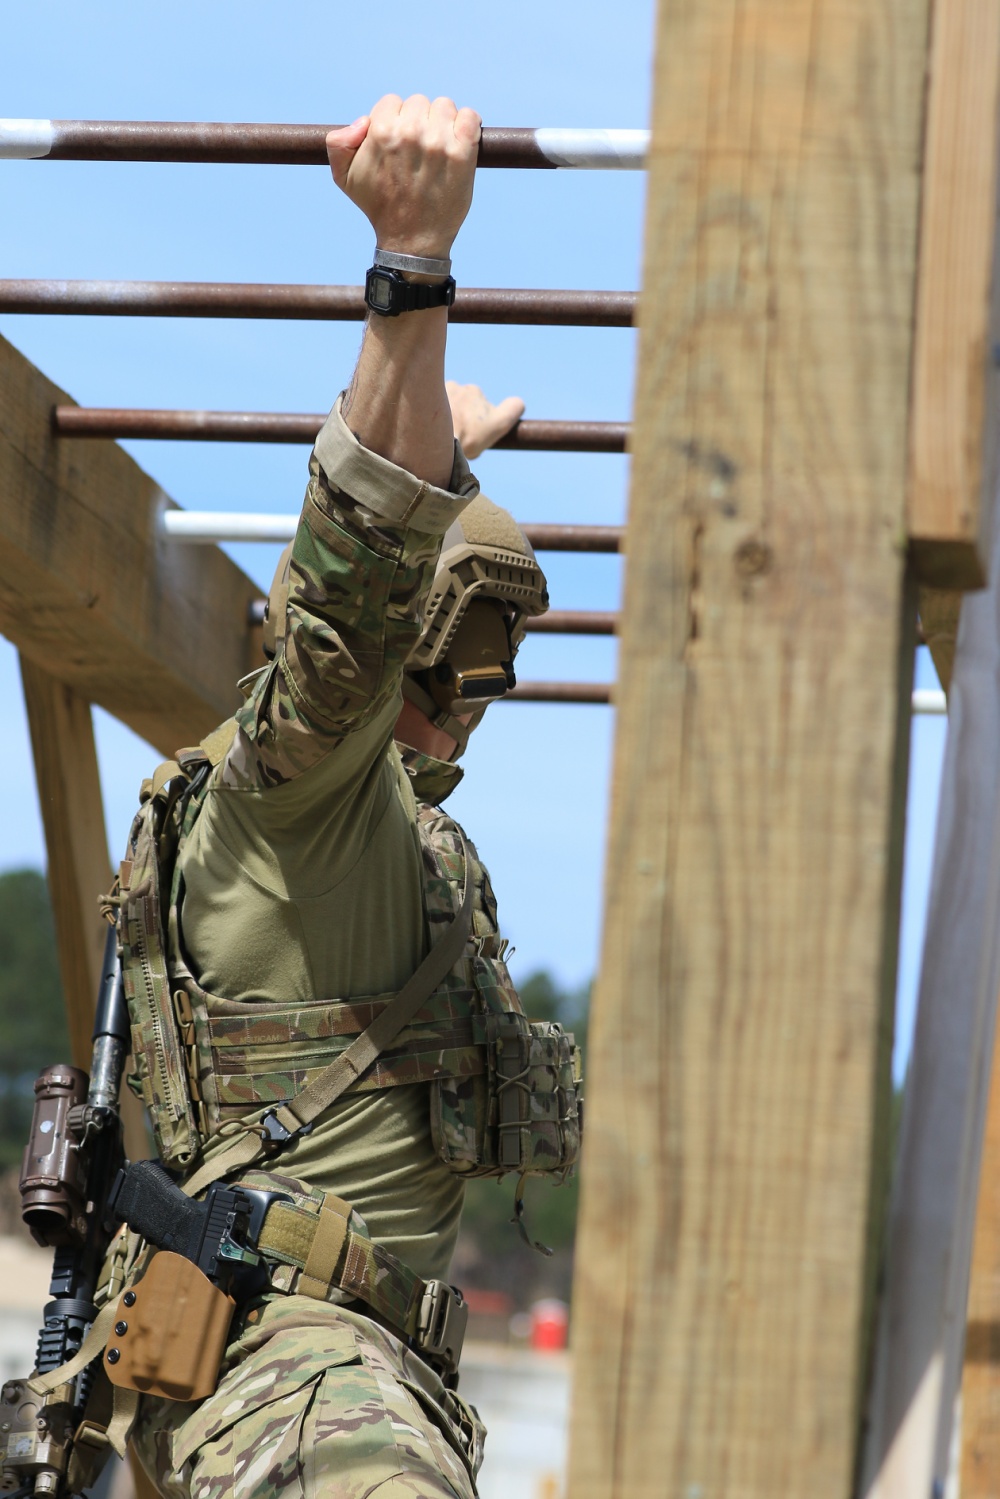 US Army Special Operators Hosted International Sniper Competition